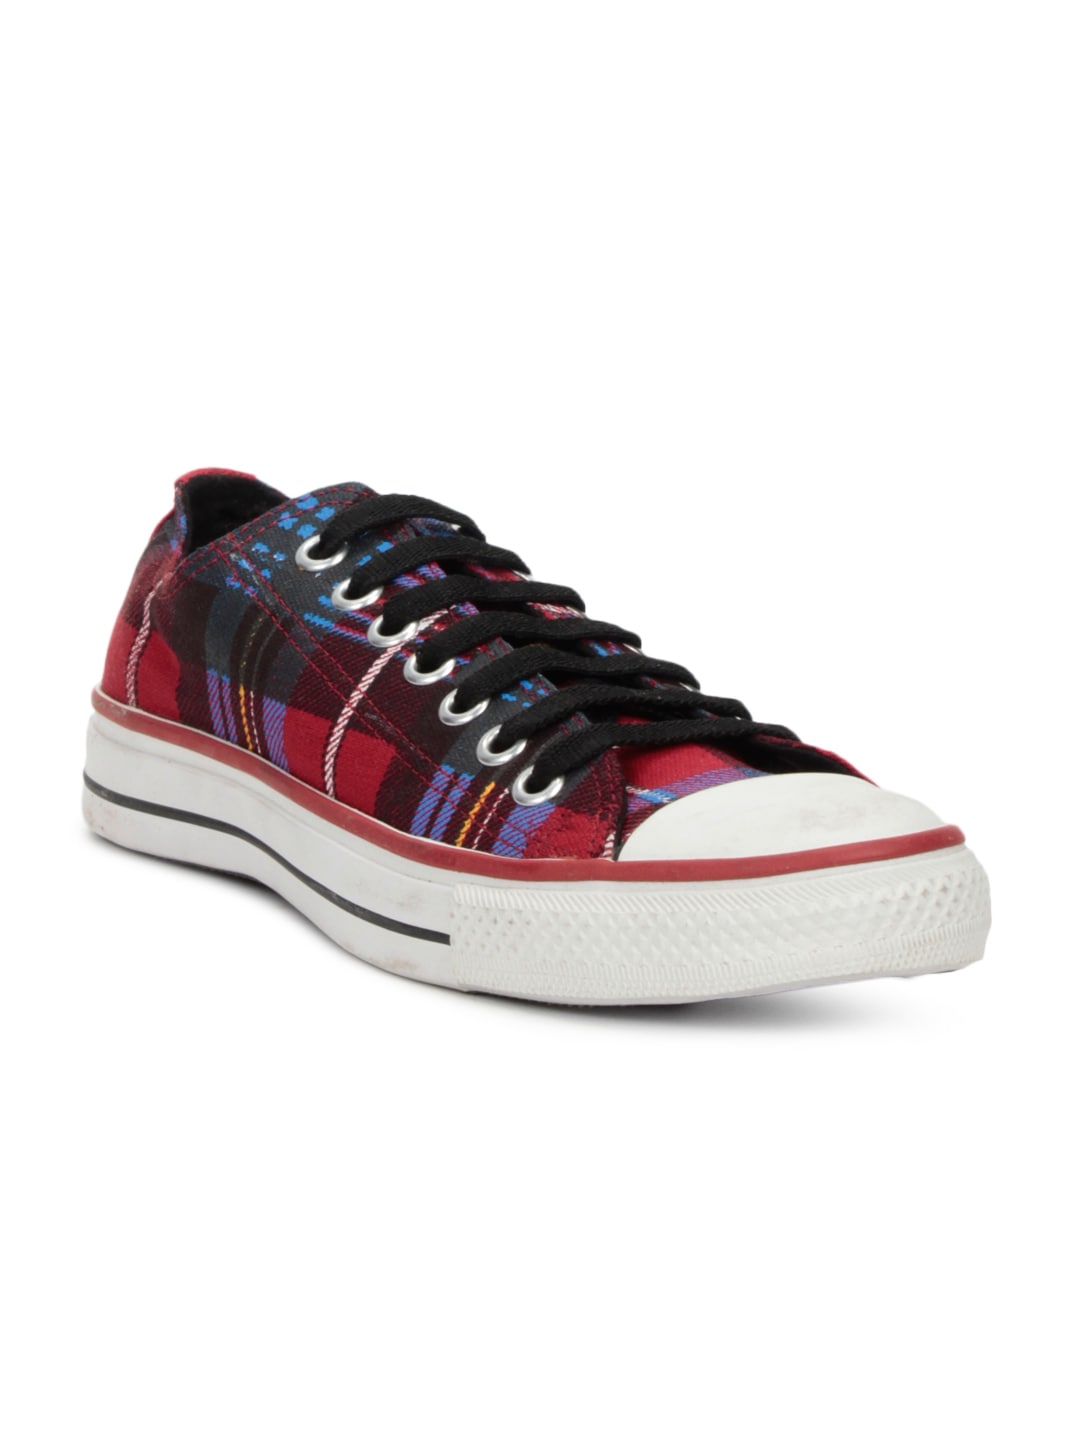 Converse Unisex Check Red Shoes